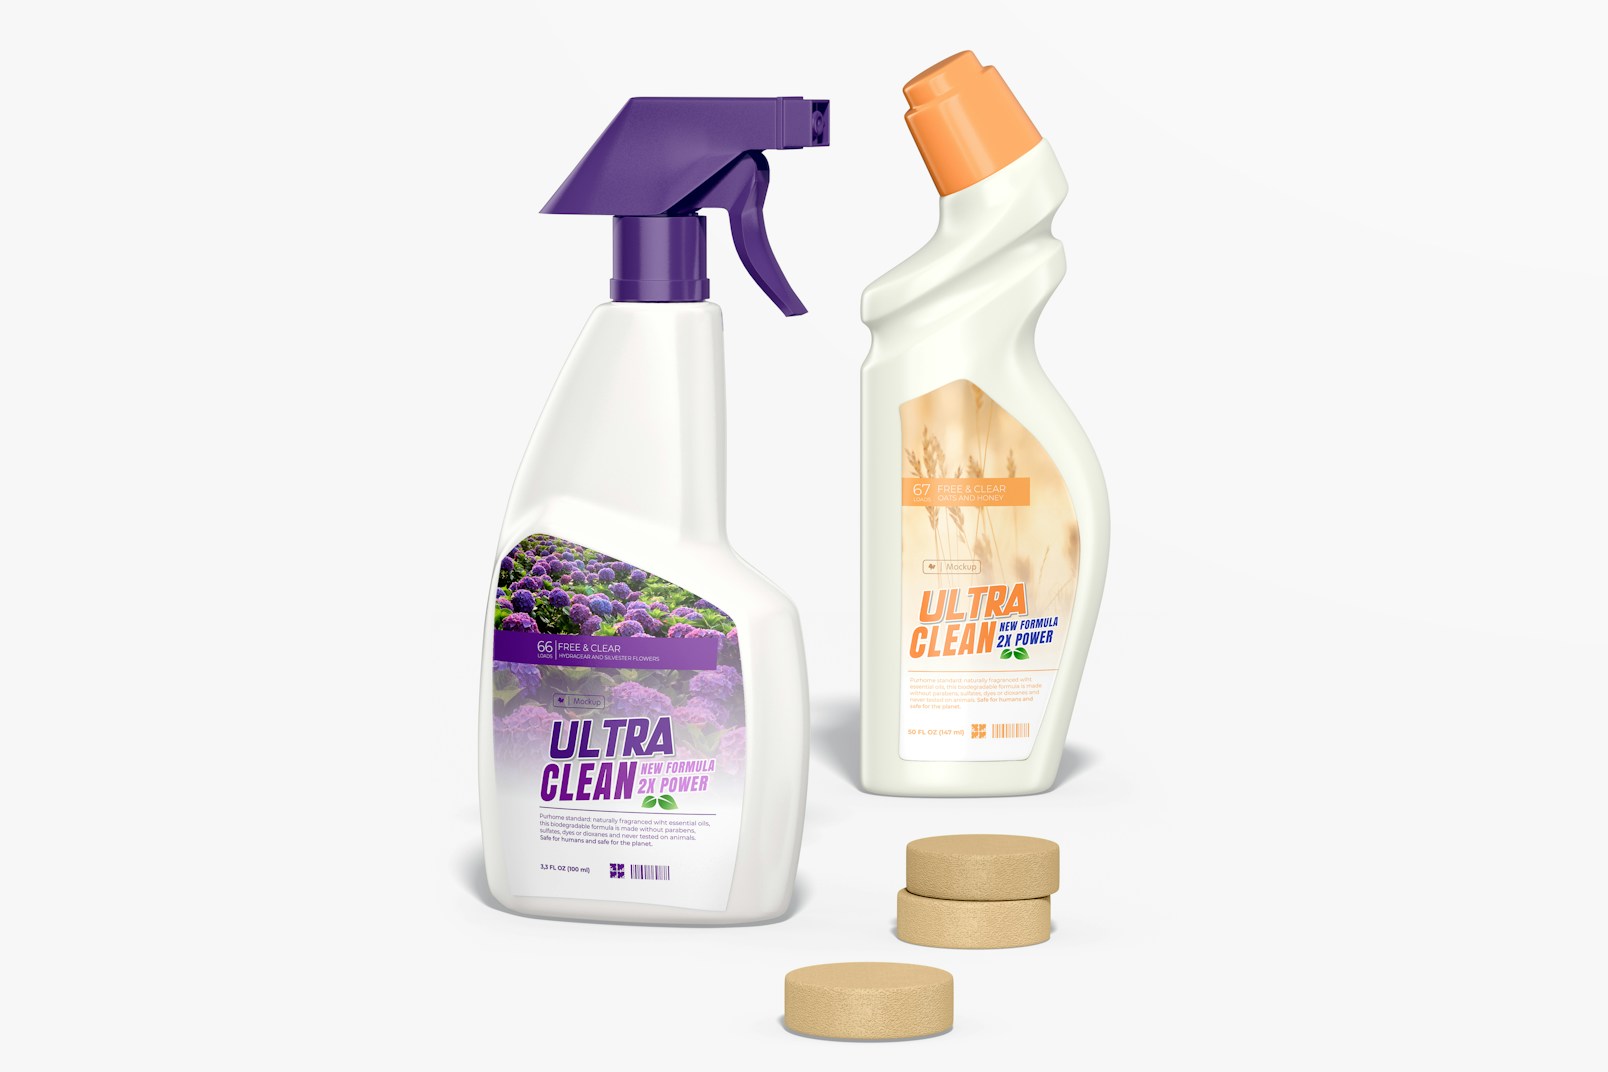 Cleaning Products Scene Mockup